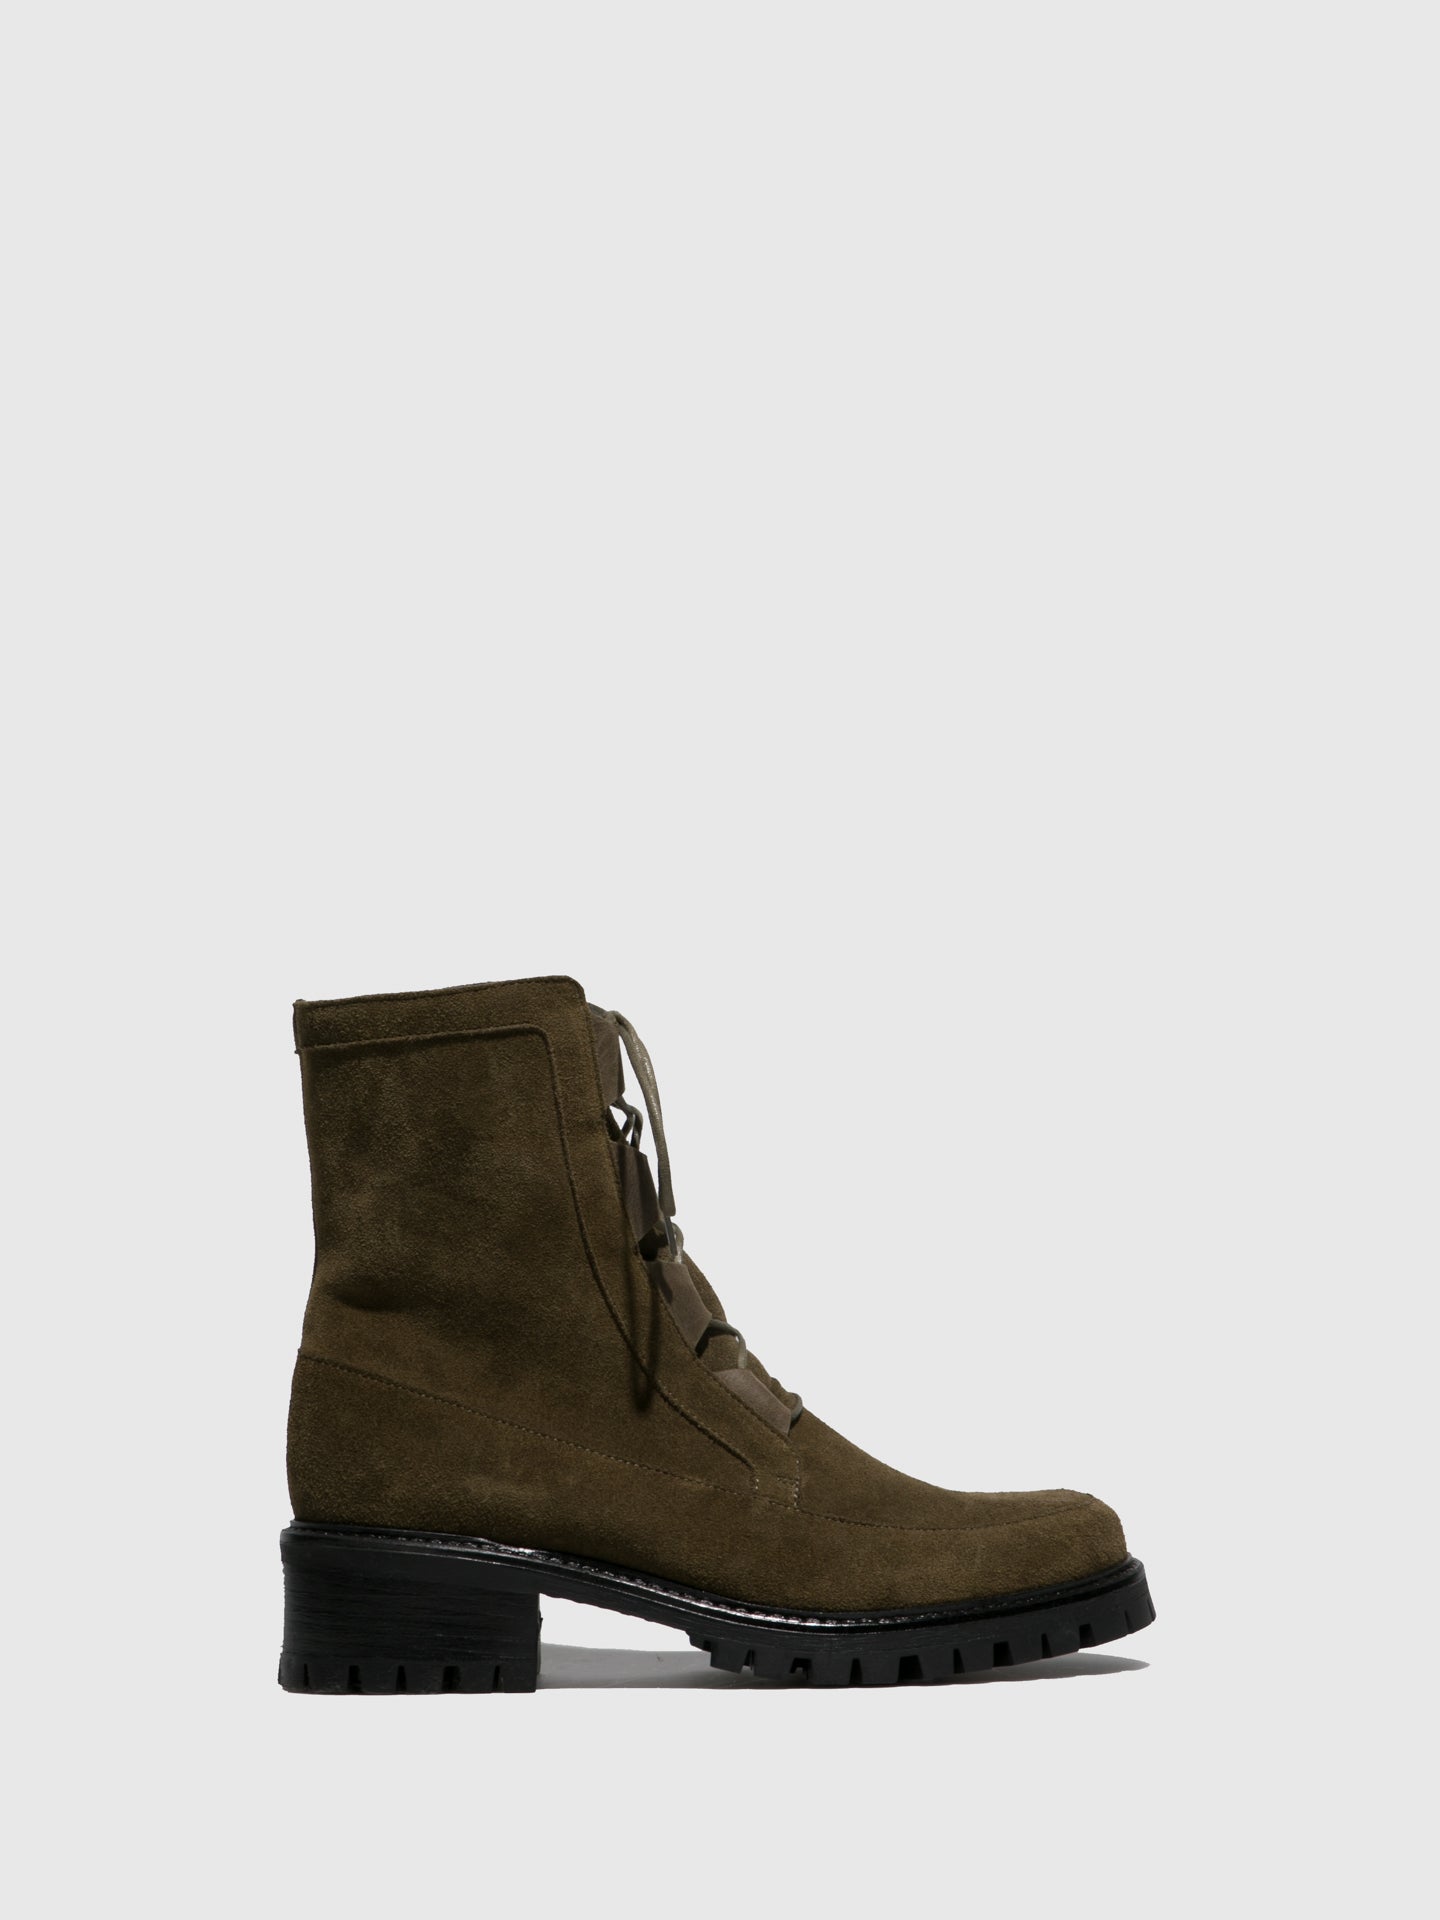 JJ Heitor Khaki Lace-up Ankle Boots